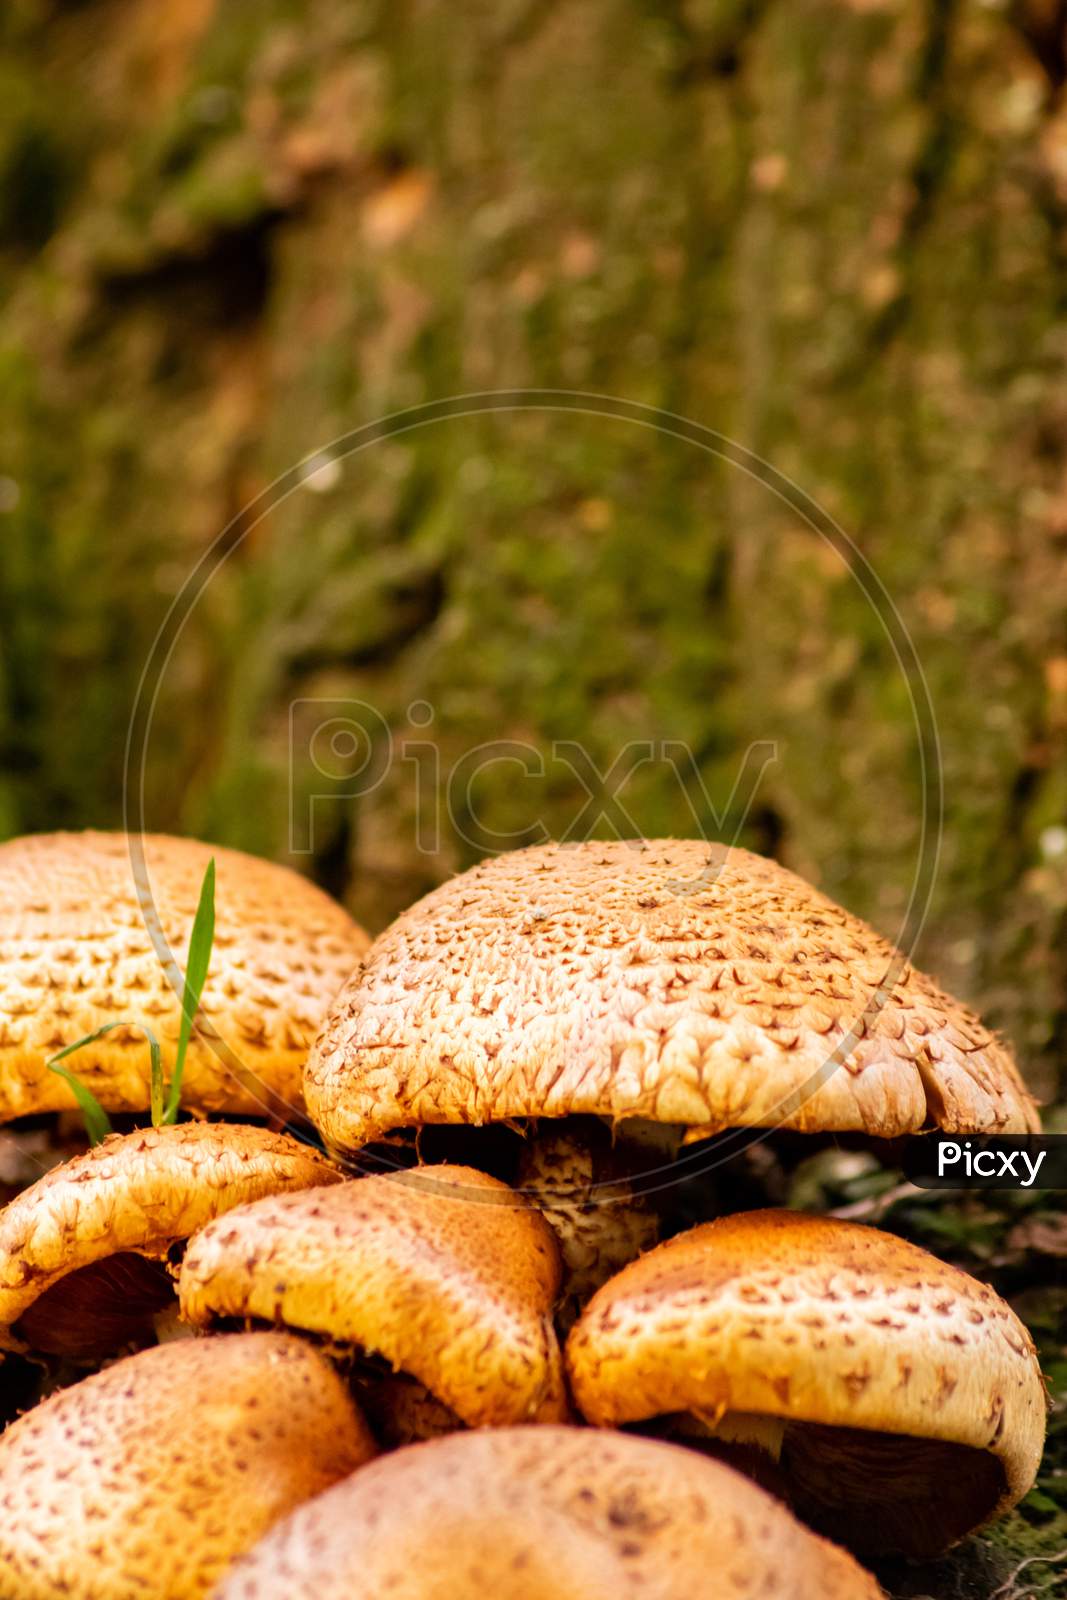 Big mushrooms in a forest found on mushrooming tour in autumn with brown foliage in backlight on the ground in mushroom season as delicious but possibly poisonous and dangerous forest fruit